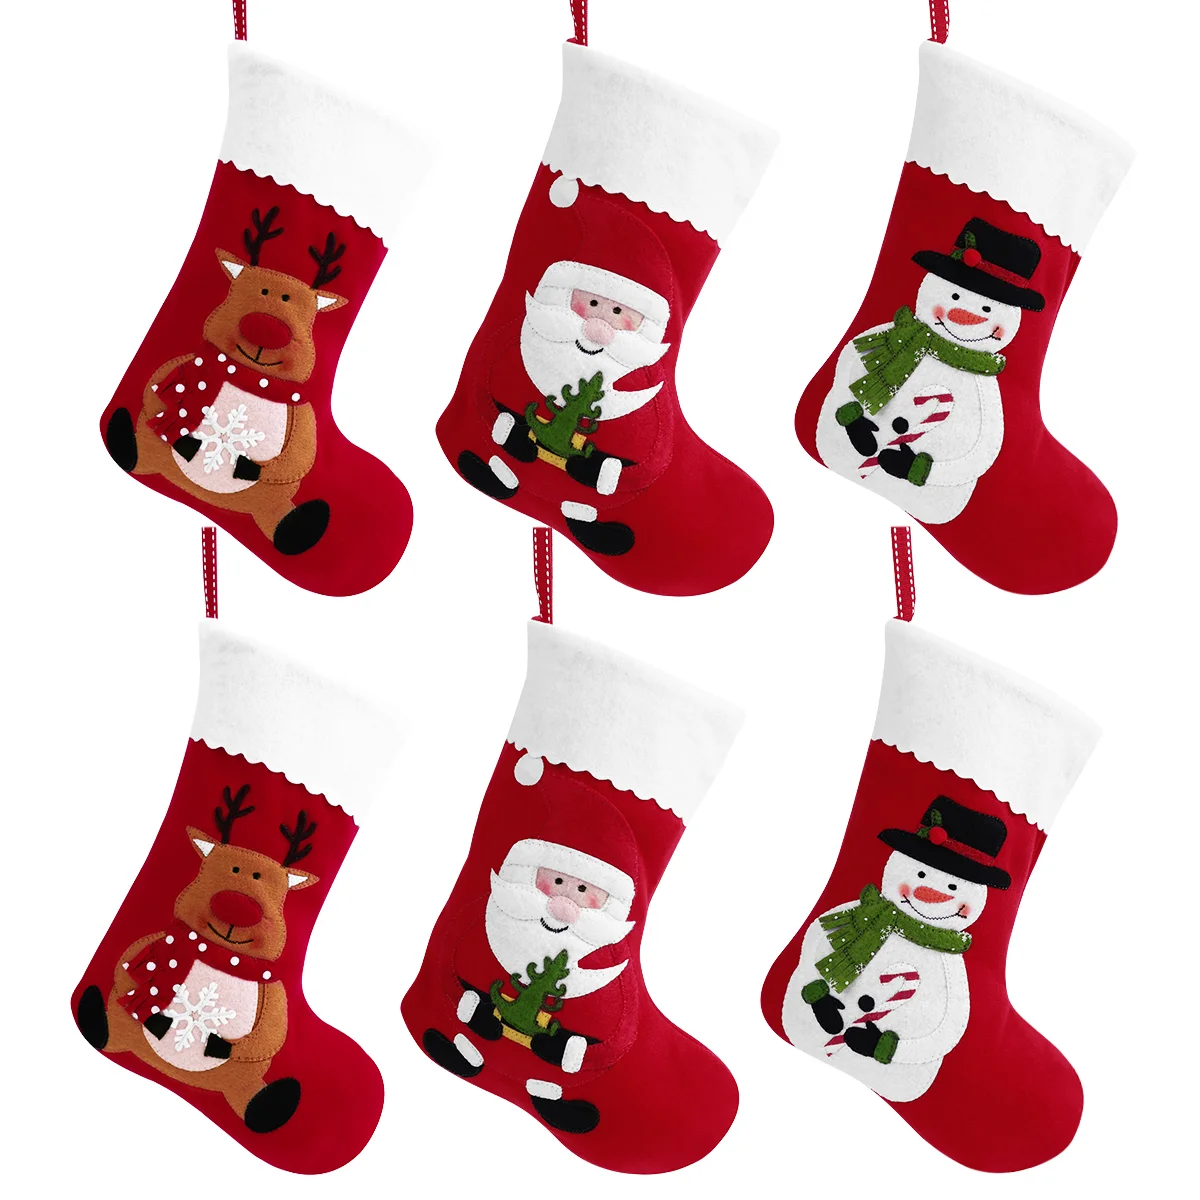 

6PCS Christmas Red Stockings, Christmas Hanging Stockings, Xmas Sock Sack, Party Hanging Gift, Decorative Bags for Holiday